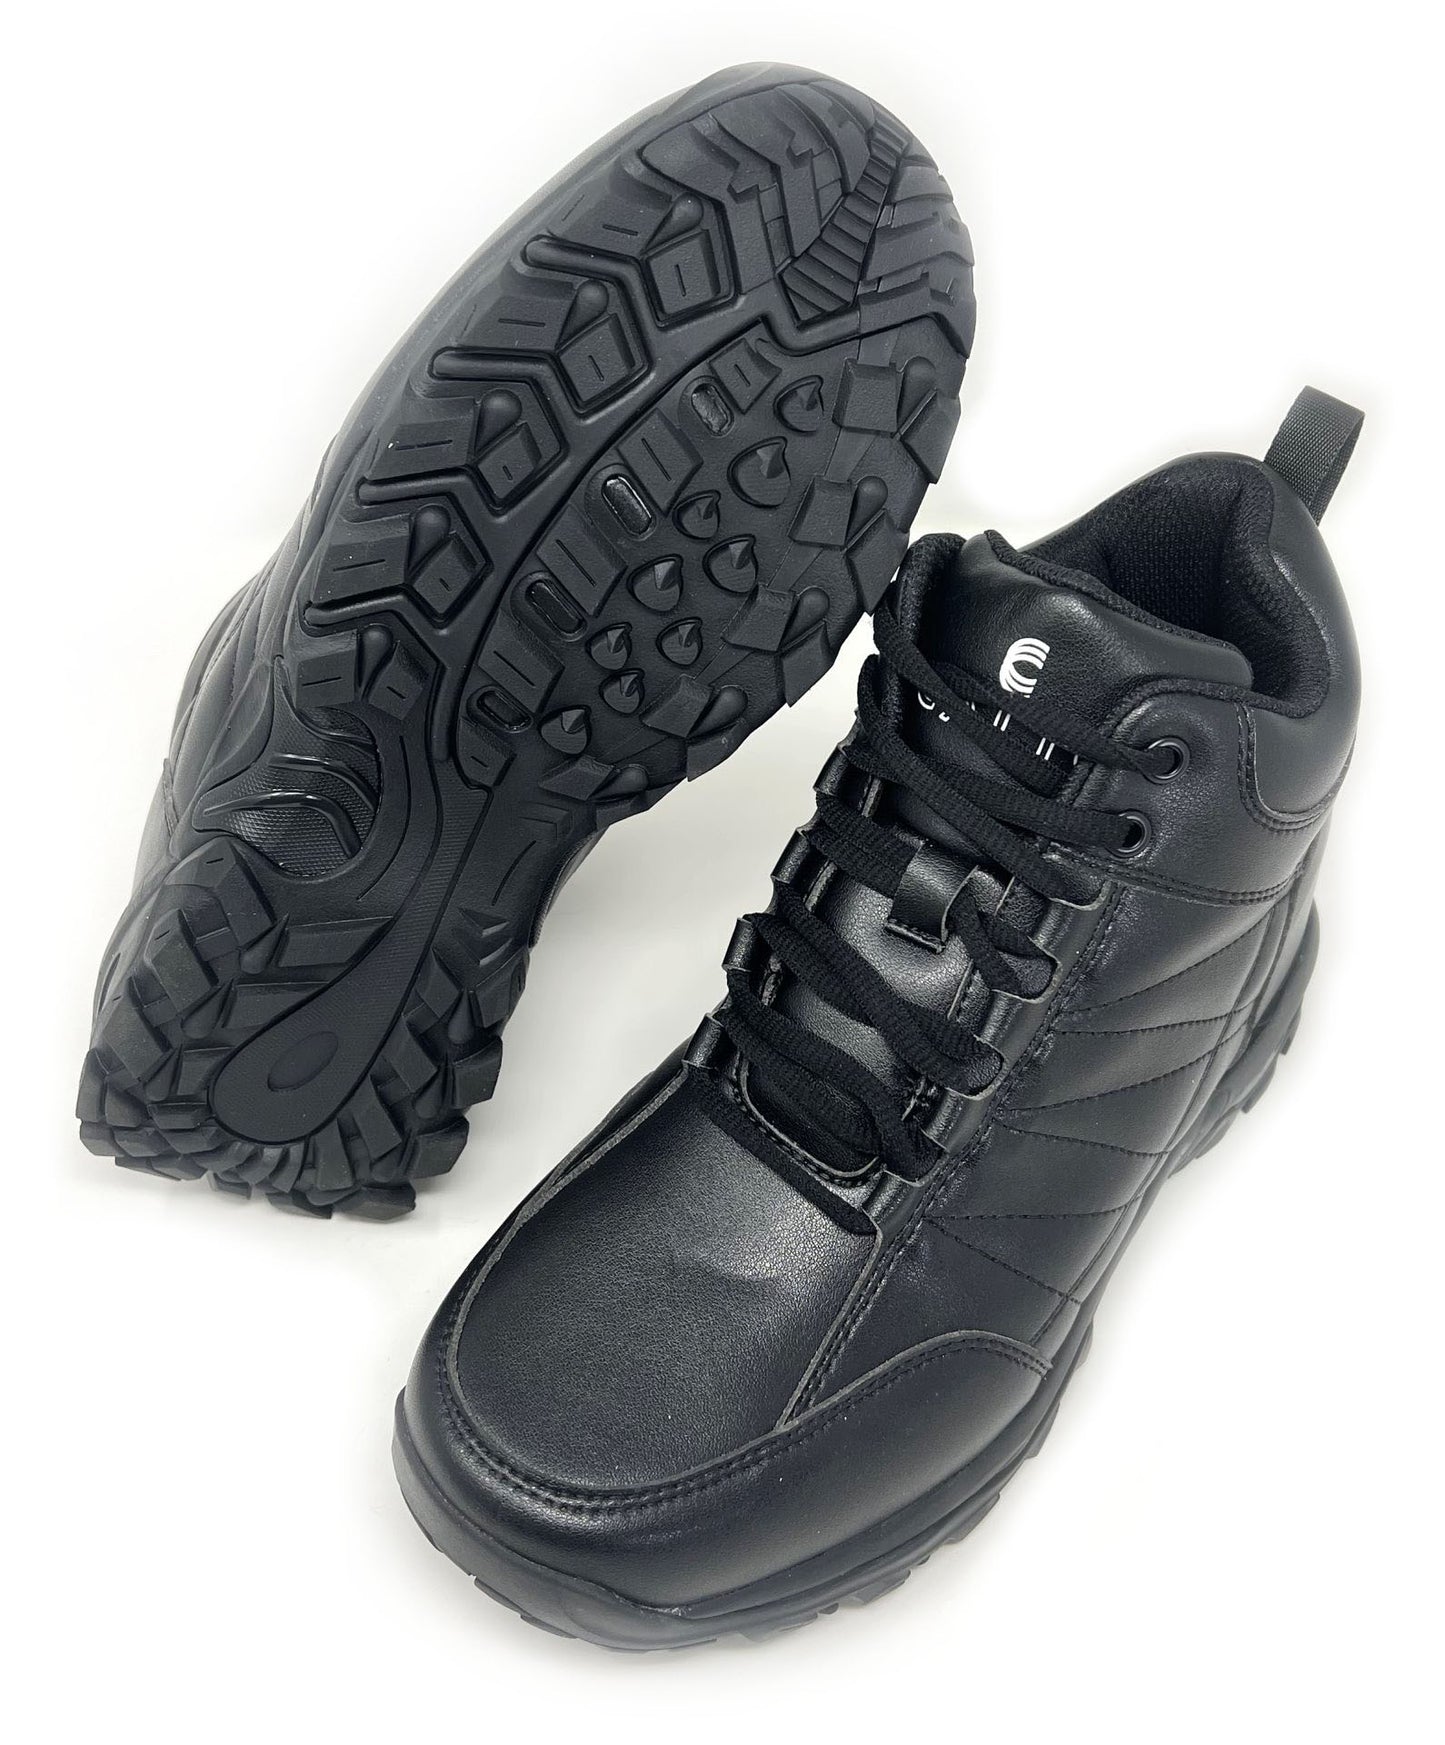 Elevator shoes height increase FSN0050 - 3.2 Inches Taller (Black) - Size 8 Only